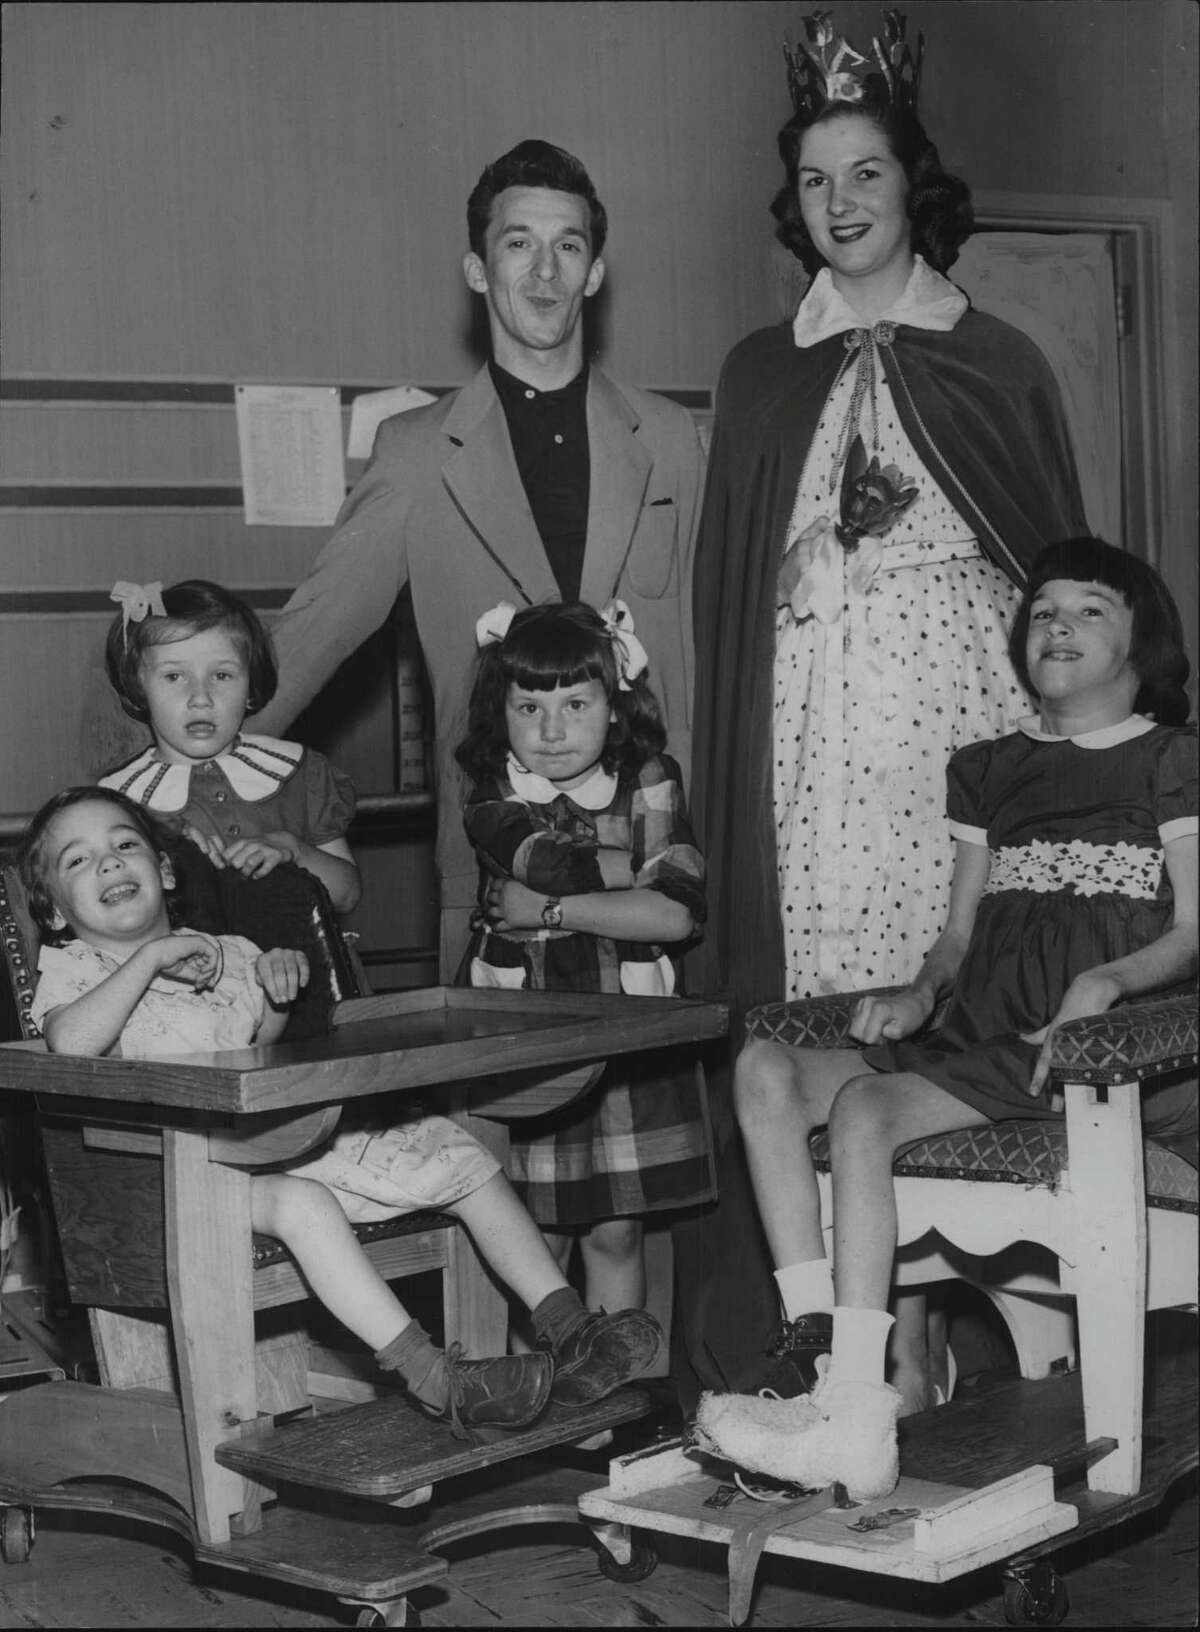 1953: Peggy A Retter, Albany Tulip Festival Queen 1953, visits children at the Albany Cerebral Palsy Treatment Center. She is shown in her regal attire with Patricia and Adele, seated, and Cynthia, Cathy and Louis Ramundo, standing. Mr. Ramundo, a former patient at the center, is producing and directing a benefit show, which will star Les Paul and Mary Ford and teen-age entertainers. June 3, 1953 (Knickerbocker News Staff Photo/Times Union Archive)